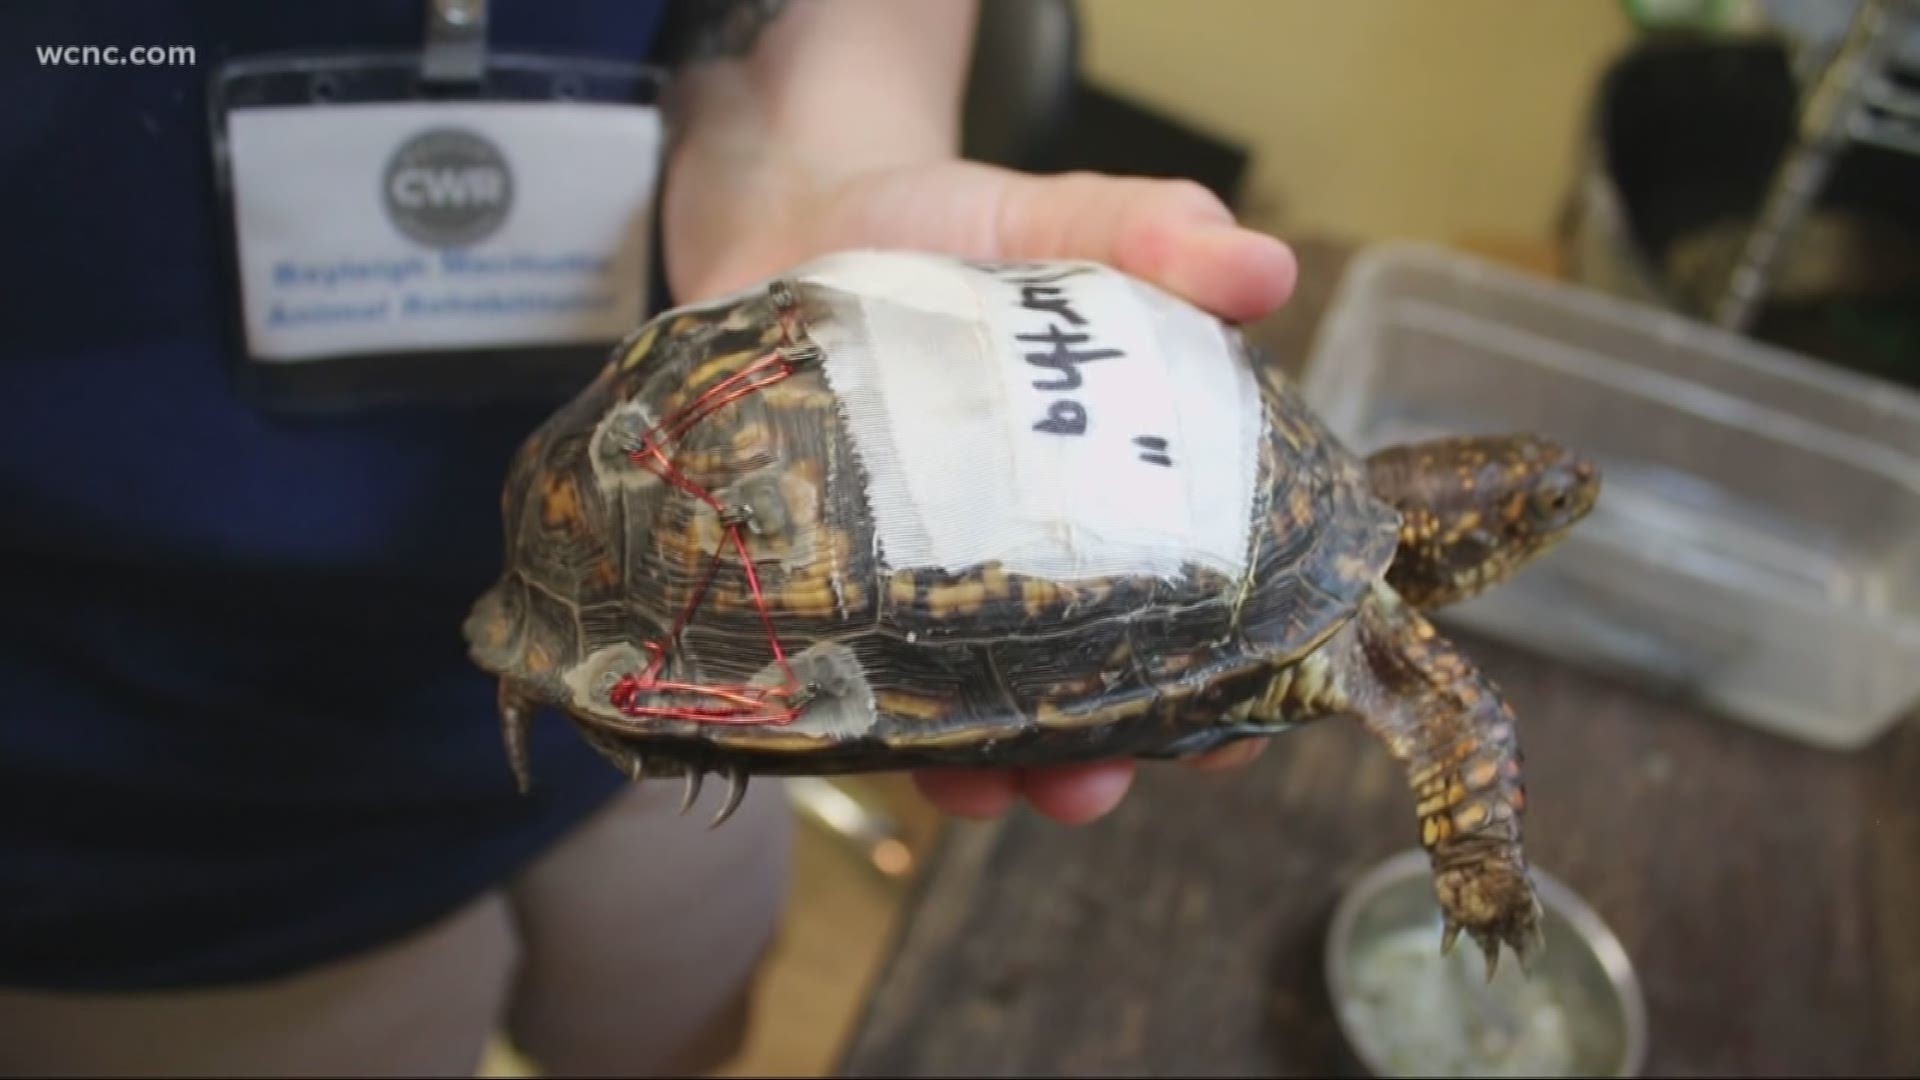 Animal Rescue Group Asks For Old Bra Hooks to Help Injured Turtles